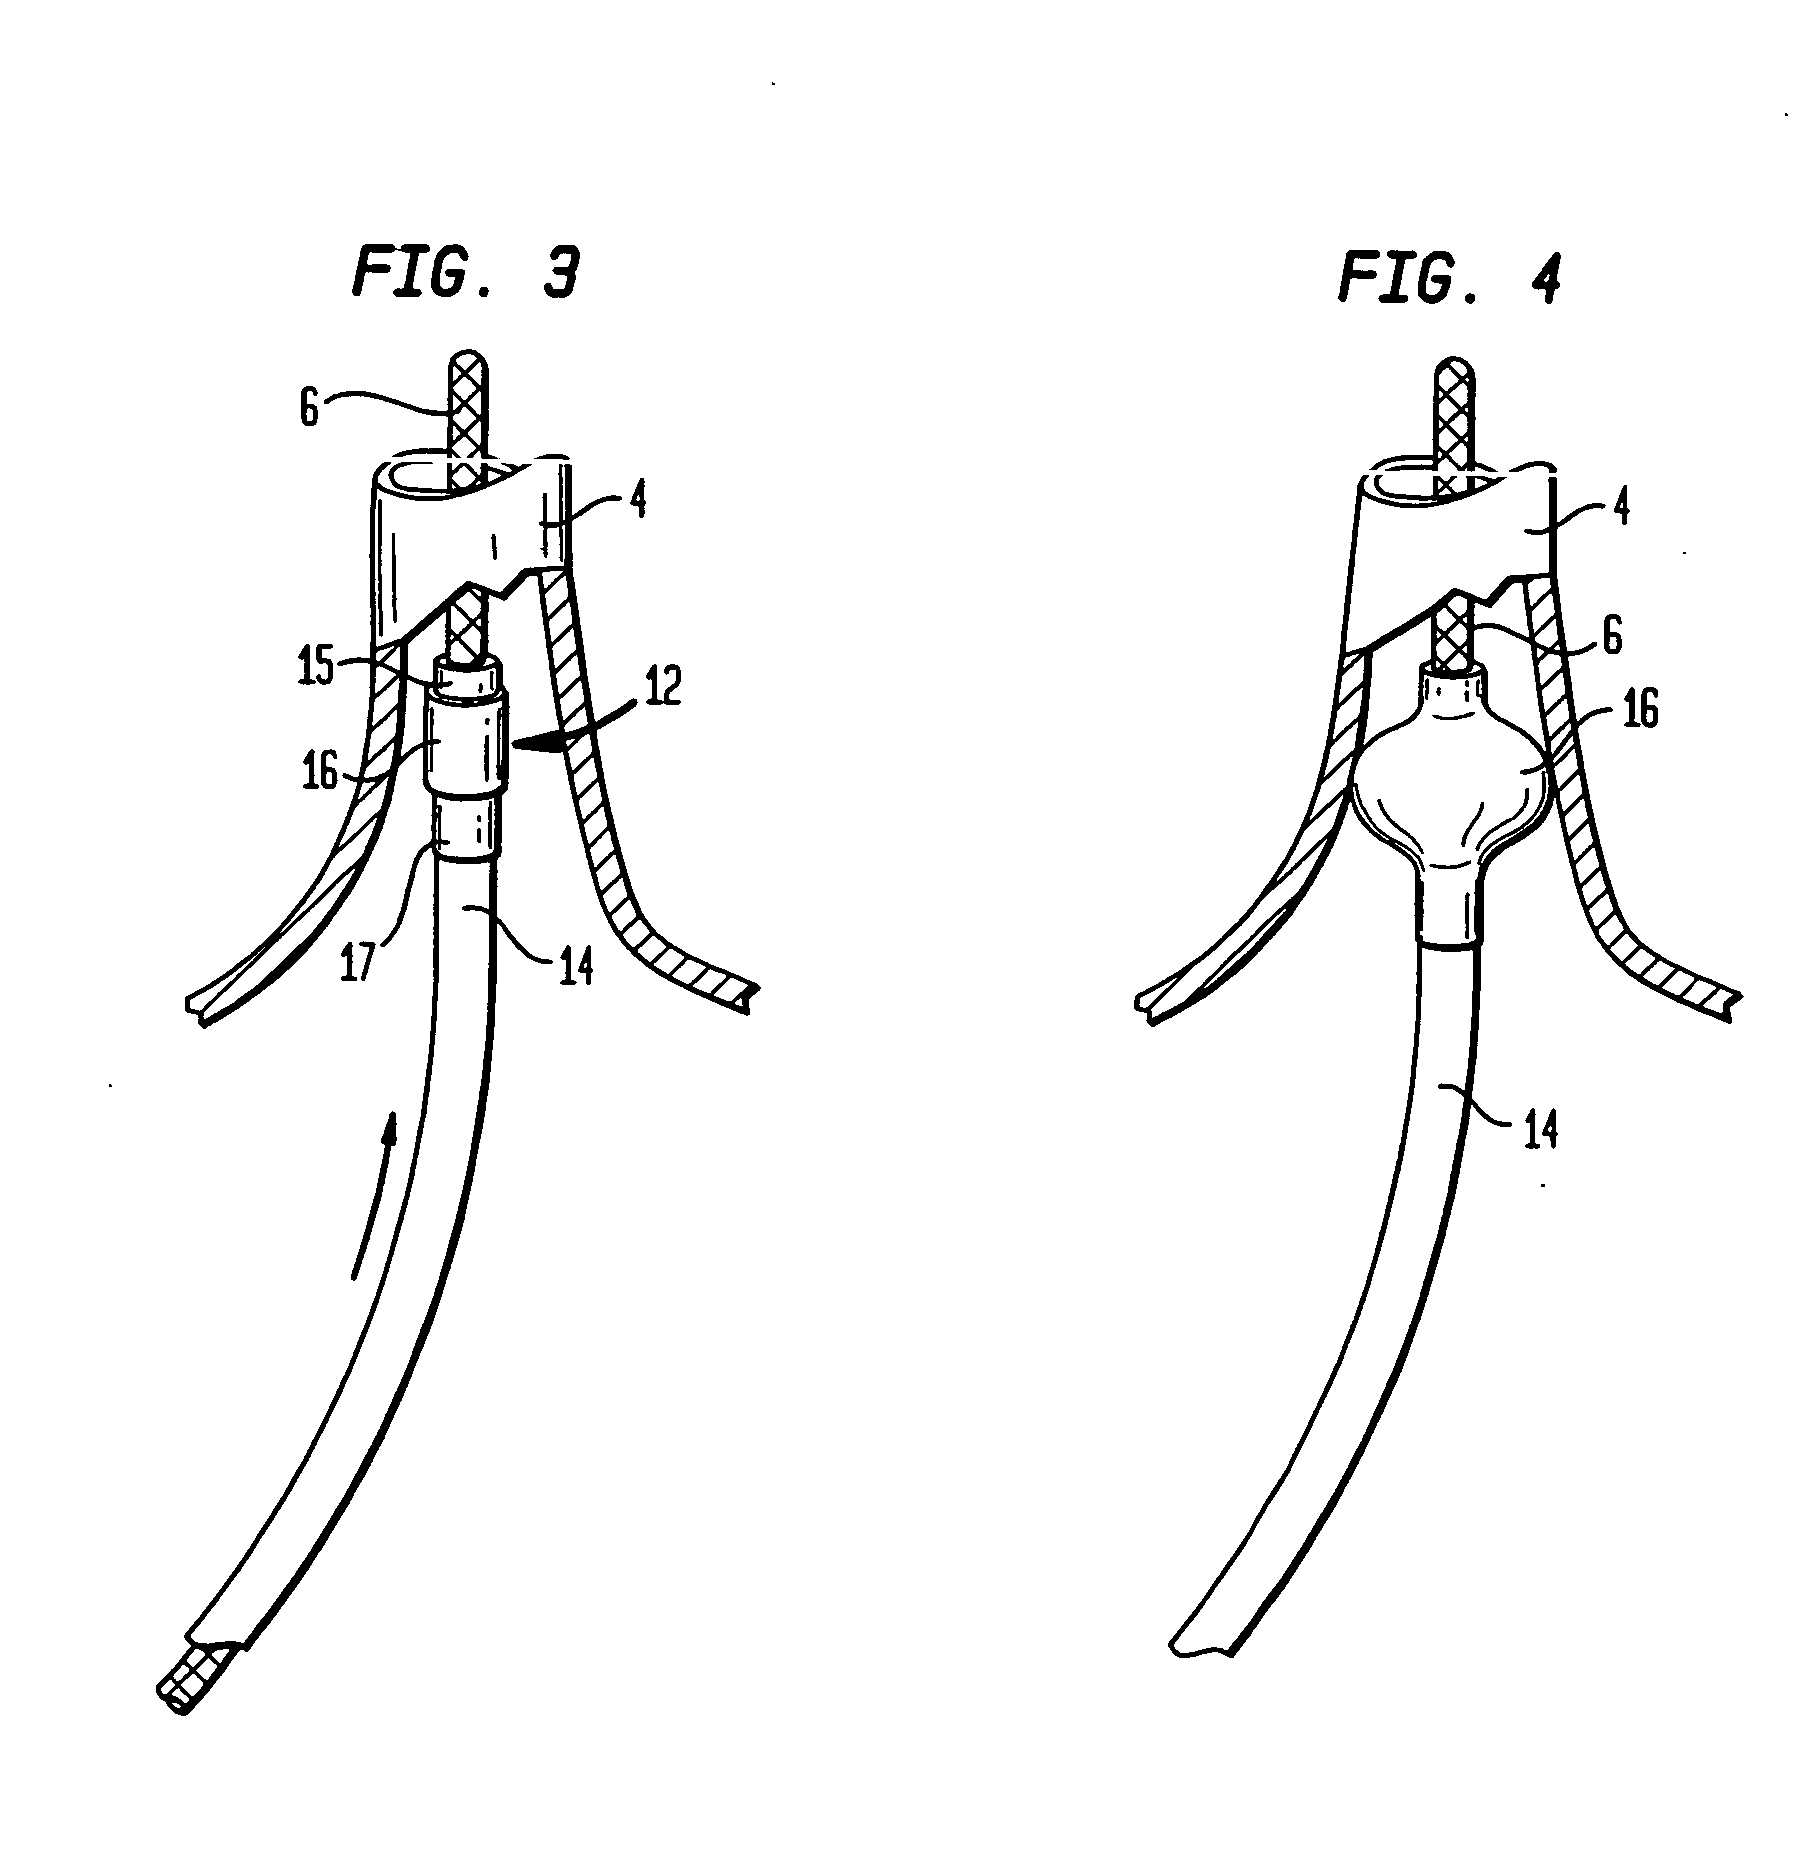 Coaxial catheter instruments for ablation with radiant energy